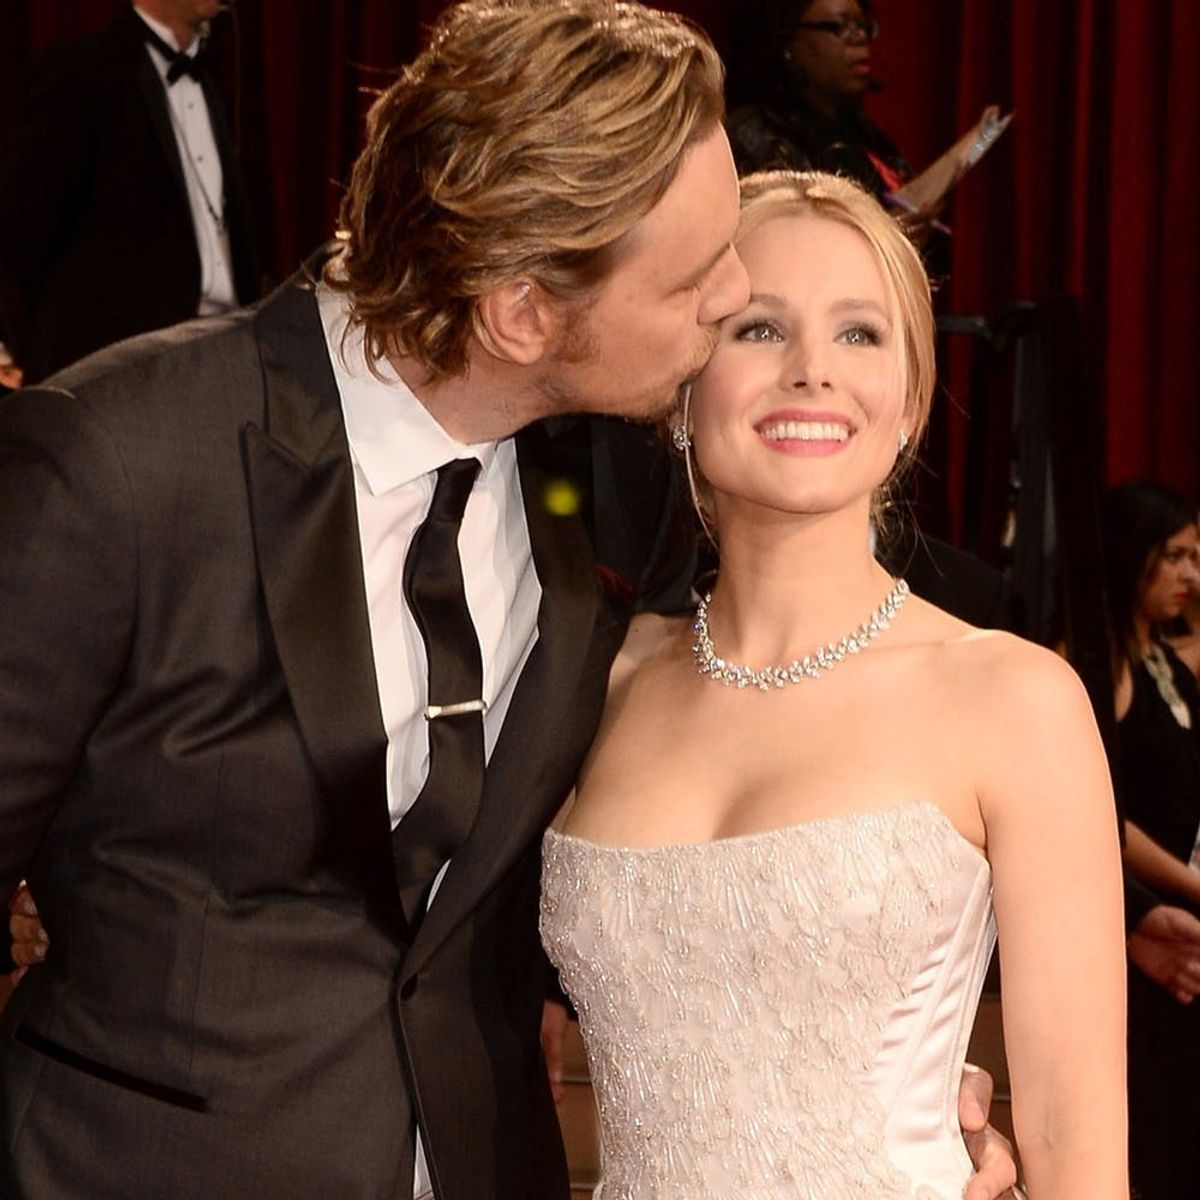 Dax Shepard and Kristen Bell Are Total Couple Goals in Their Newest Family Video